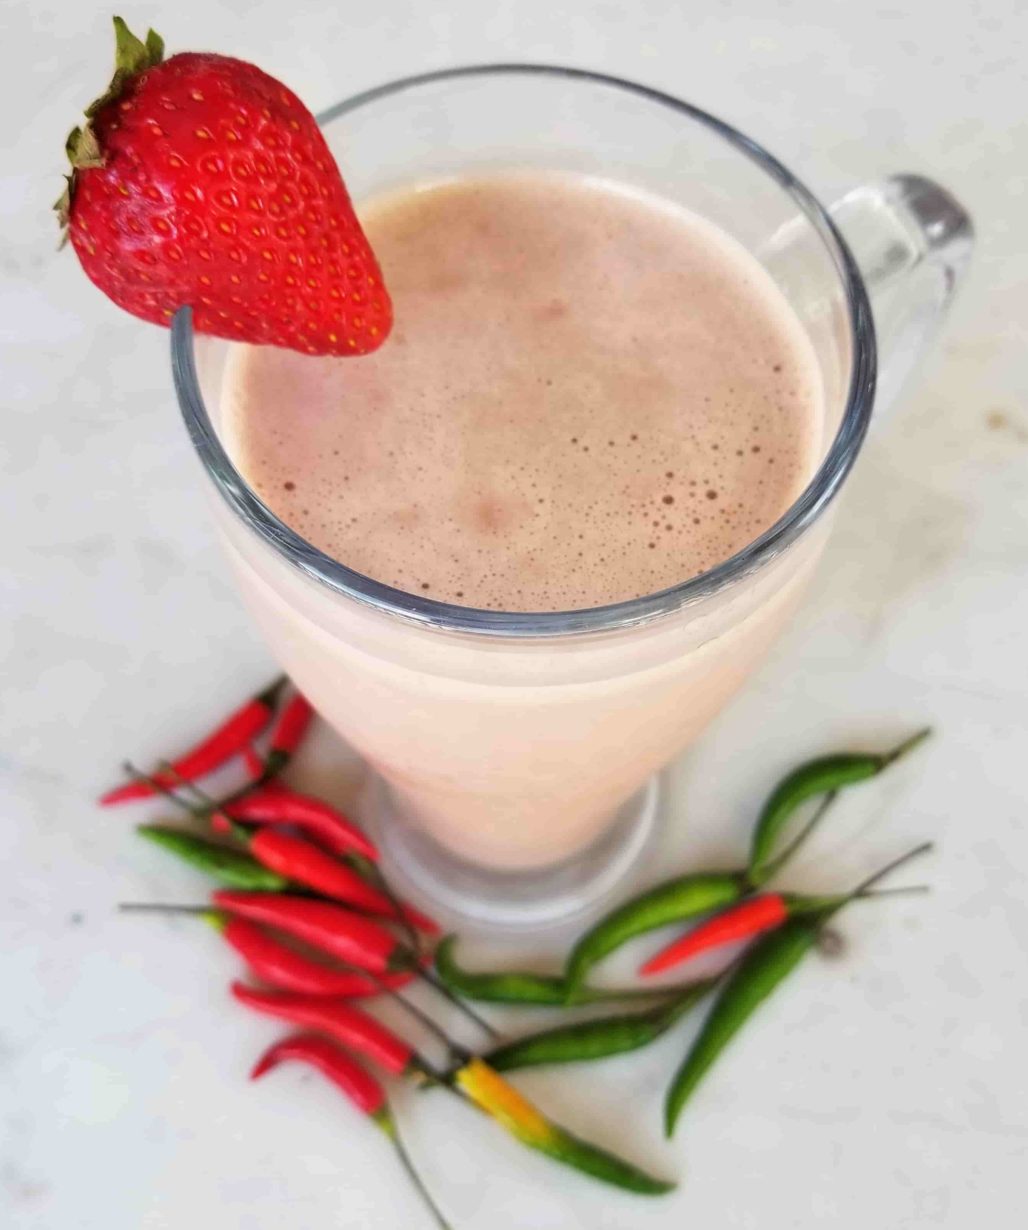 Thai Chili Chocolate Strawberry Protein Smoothie- A Ménage à Trois of Sensual Chocolate Strawberry And Peppers to Help Spice Things Up